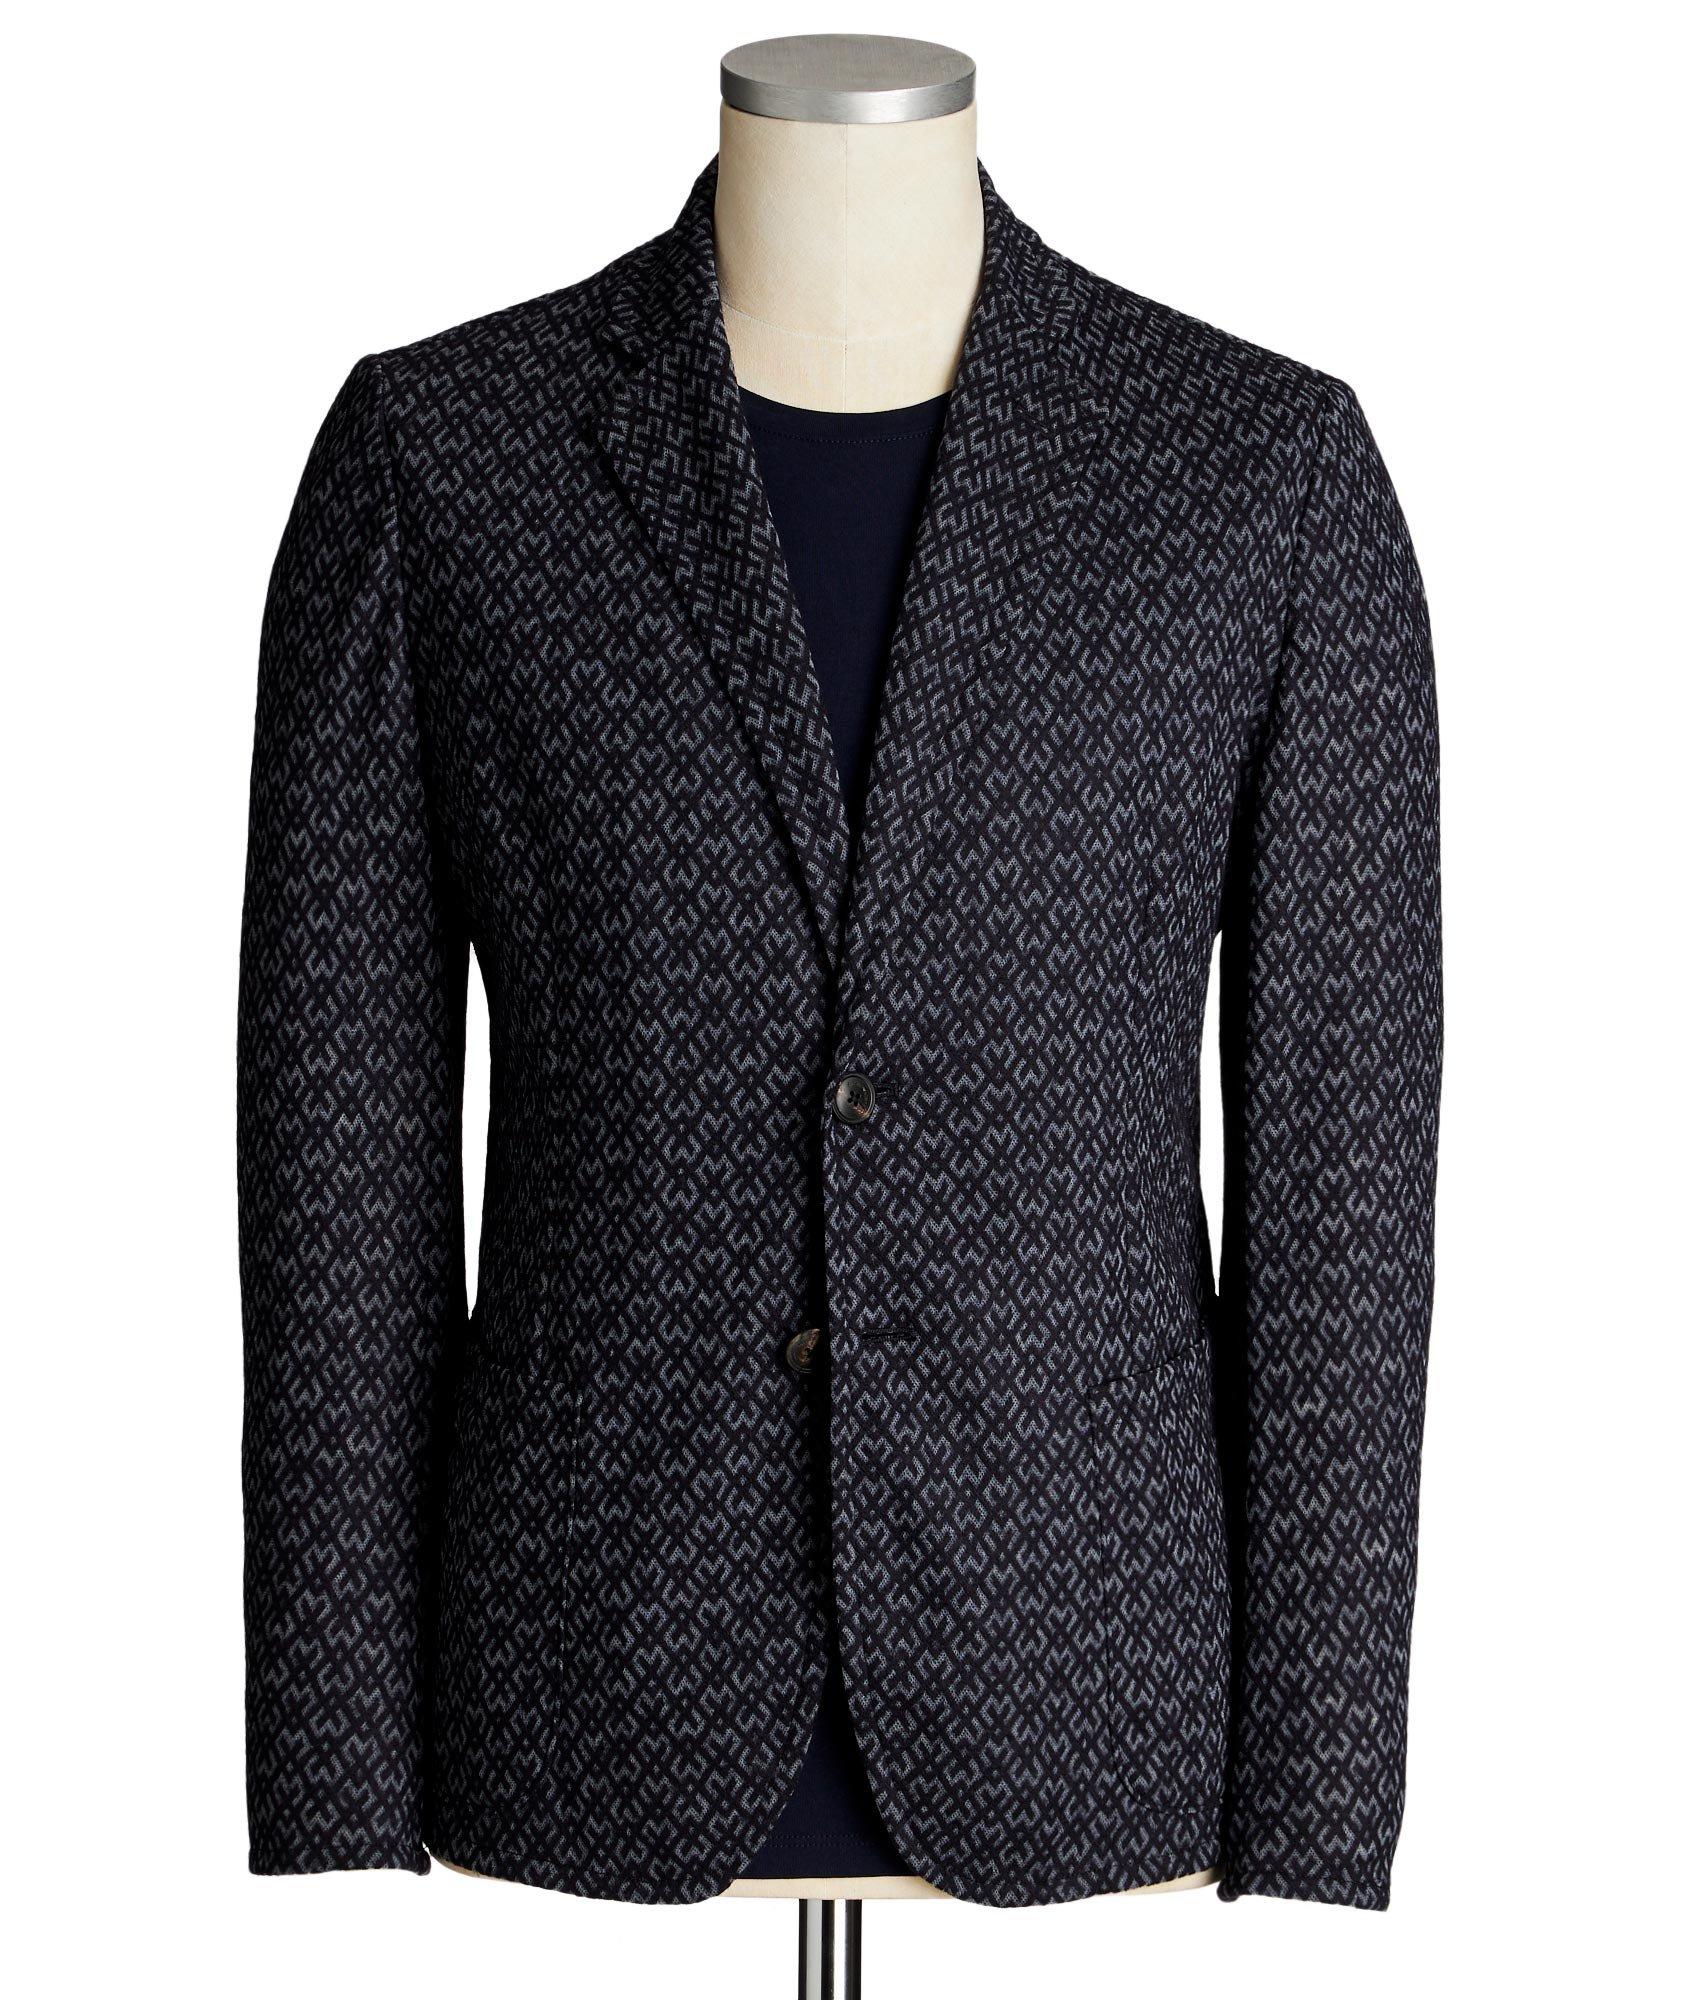 Unstructured Wool-Blend Sports Jacket image 0